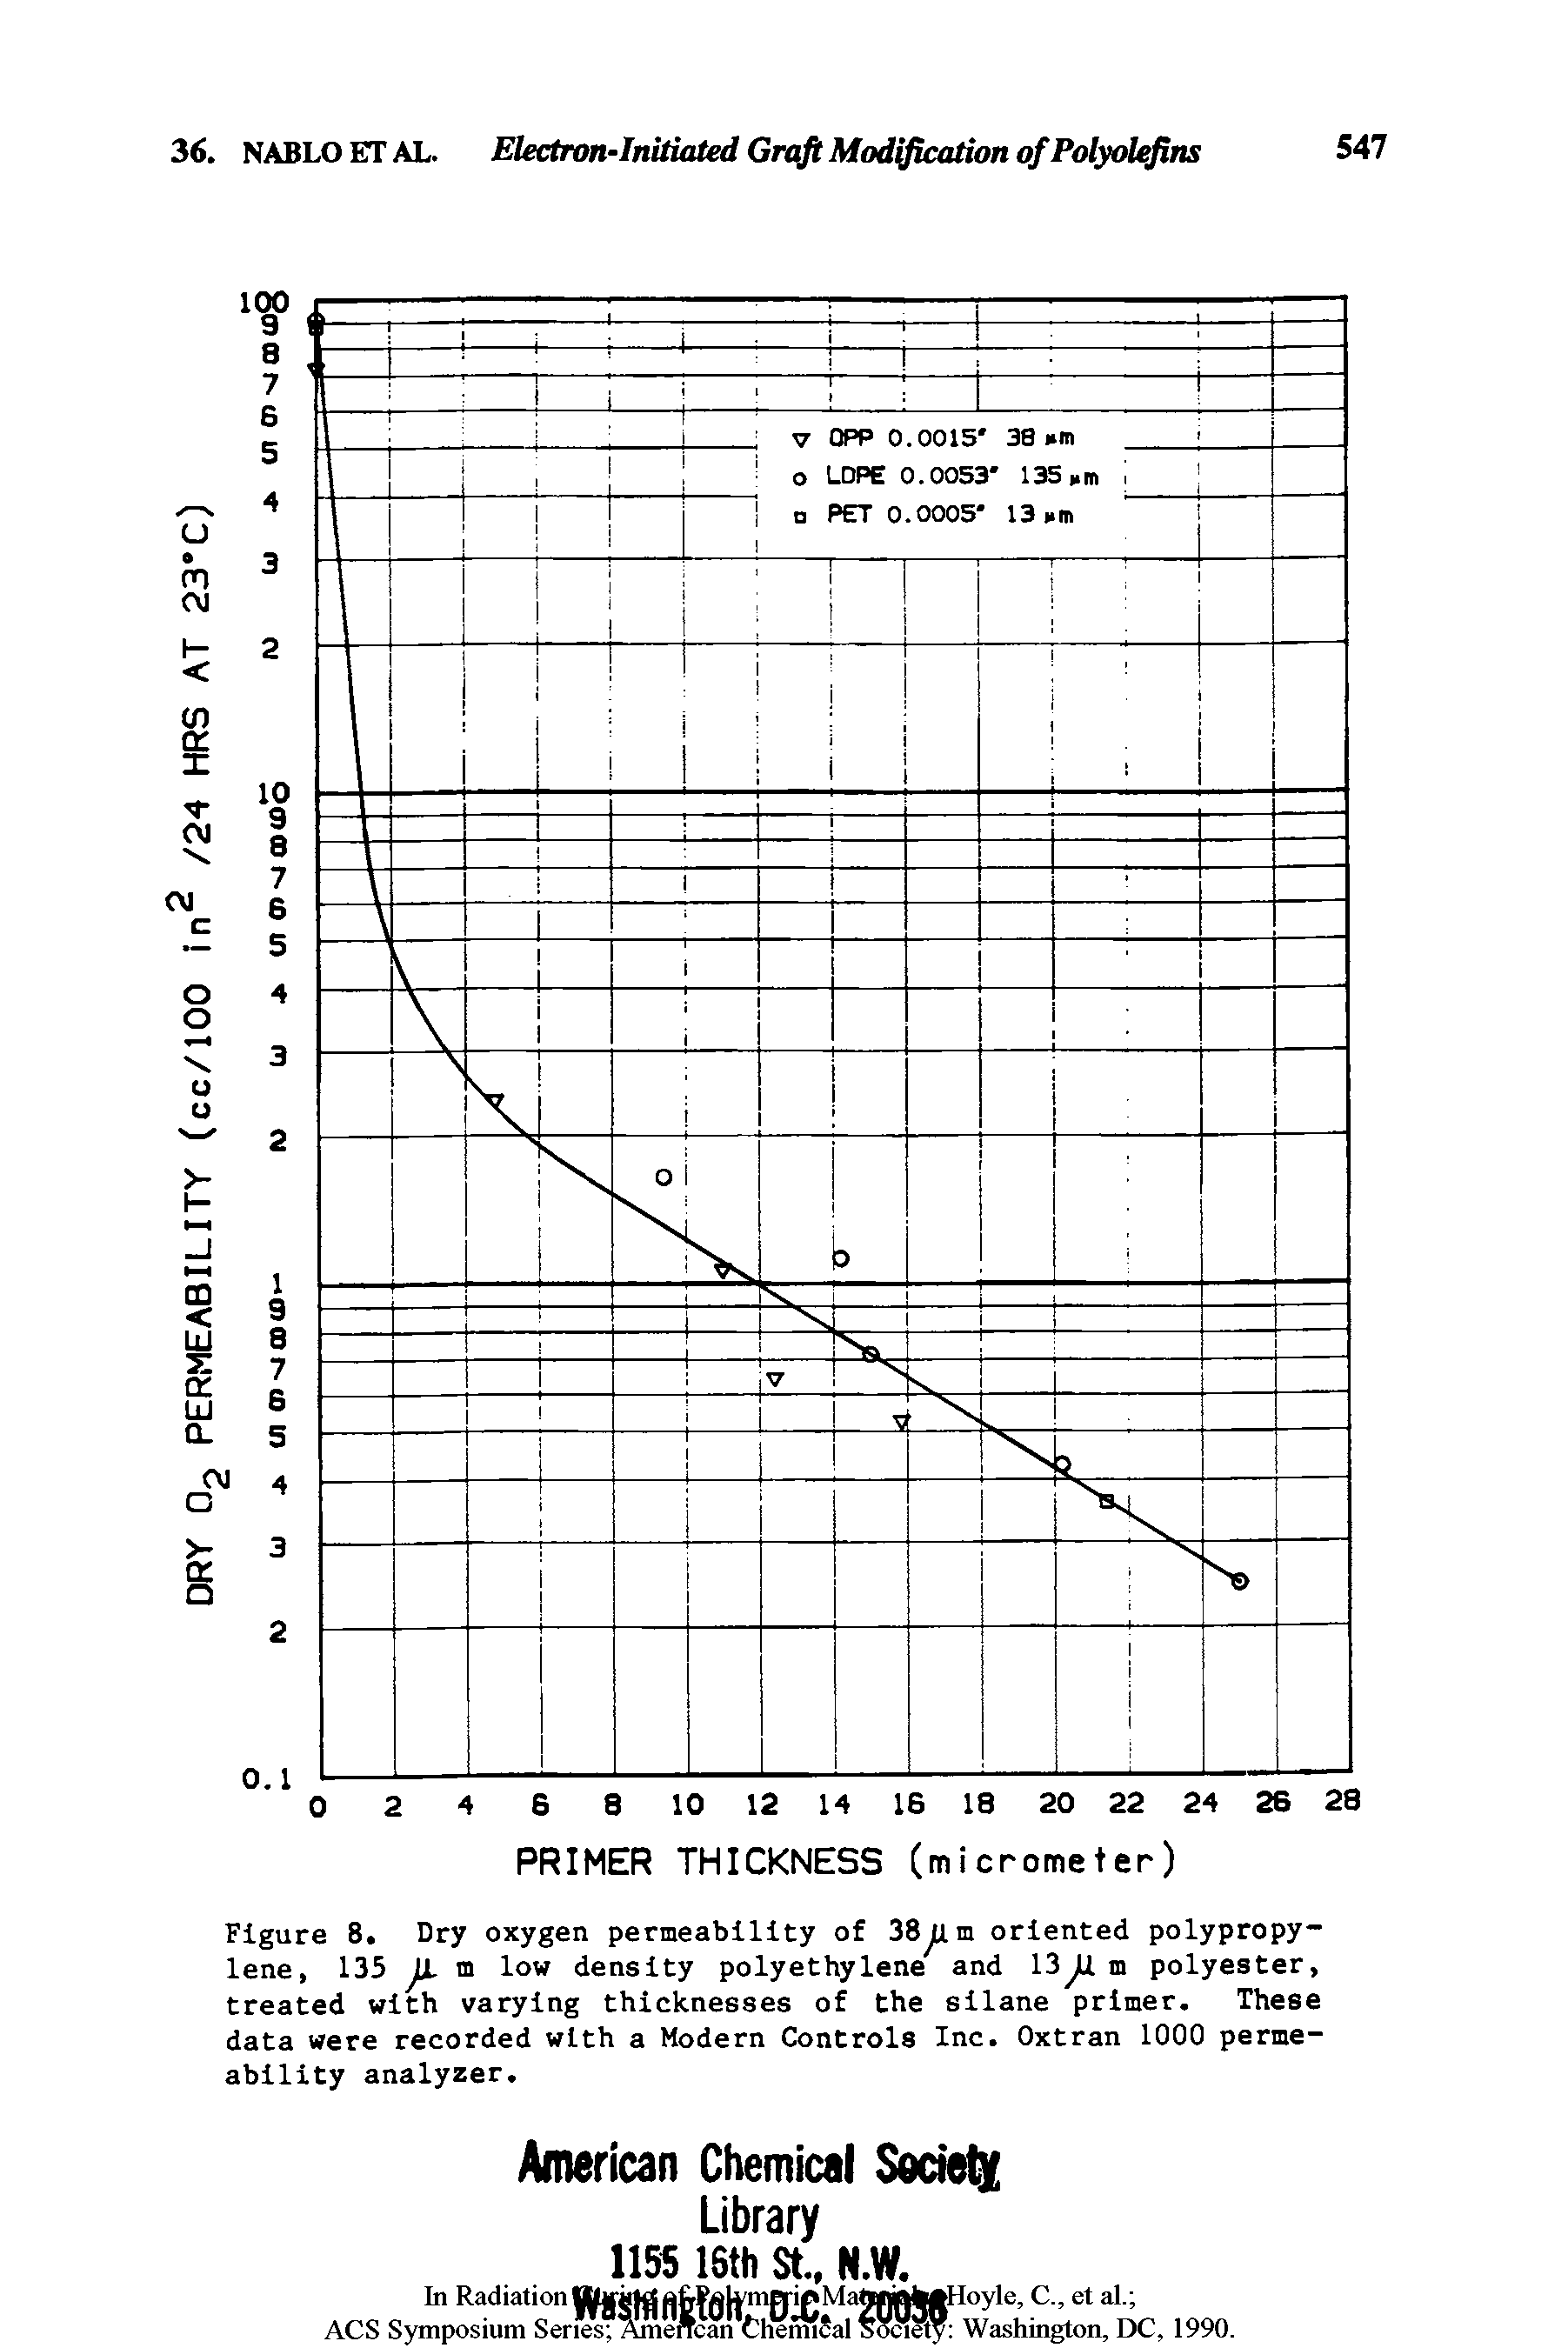 Figure 8. Dry oxygen permeability of 38 m oriented polypropylene, 135 jX. ffl low density polyethylene and 13 m polyester, treated with varying thicknesses of the silane primer. These data were recorded with a Modern Controls Inc. Oxtran 1000 permeability analyzer.